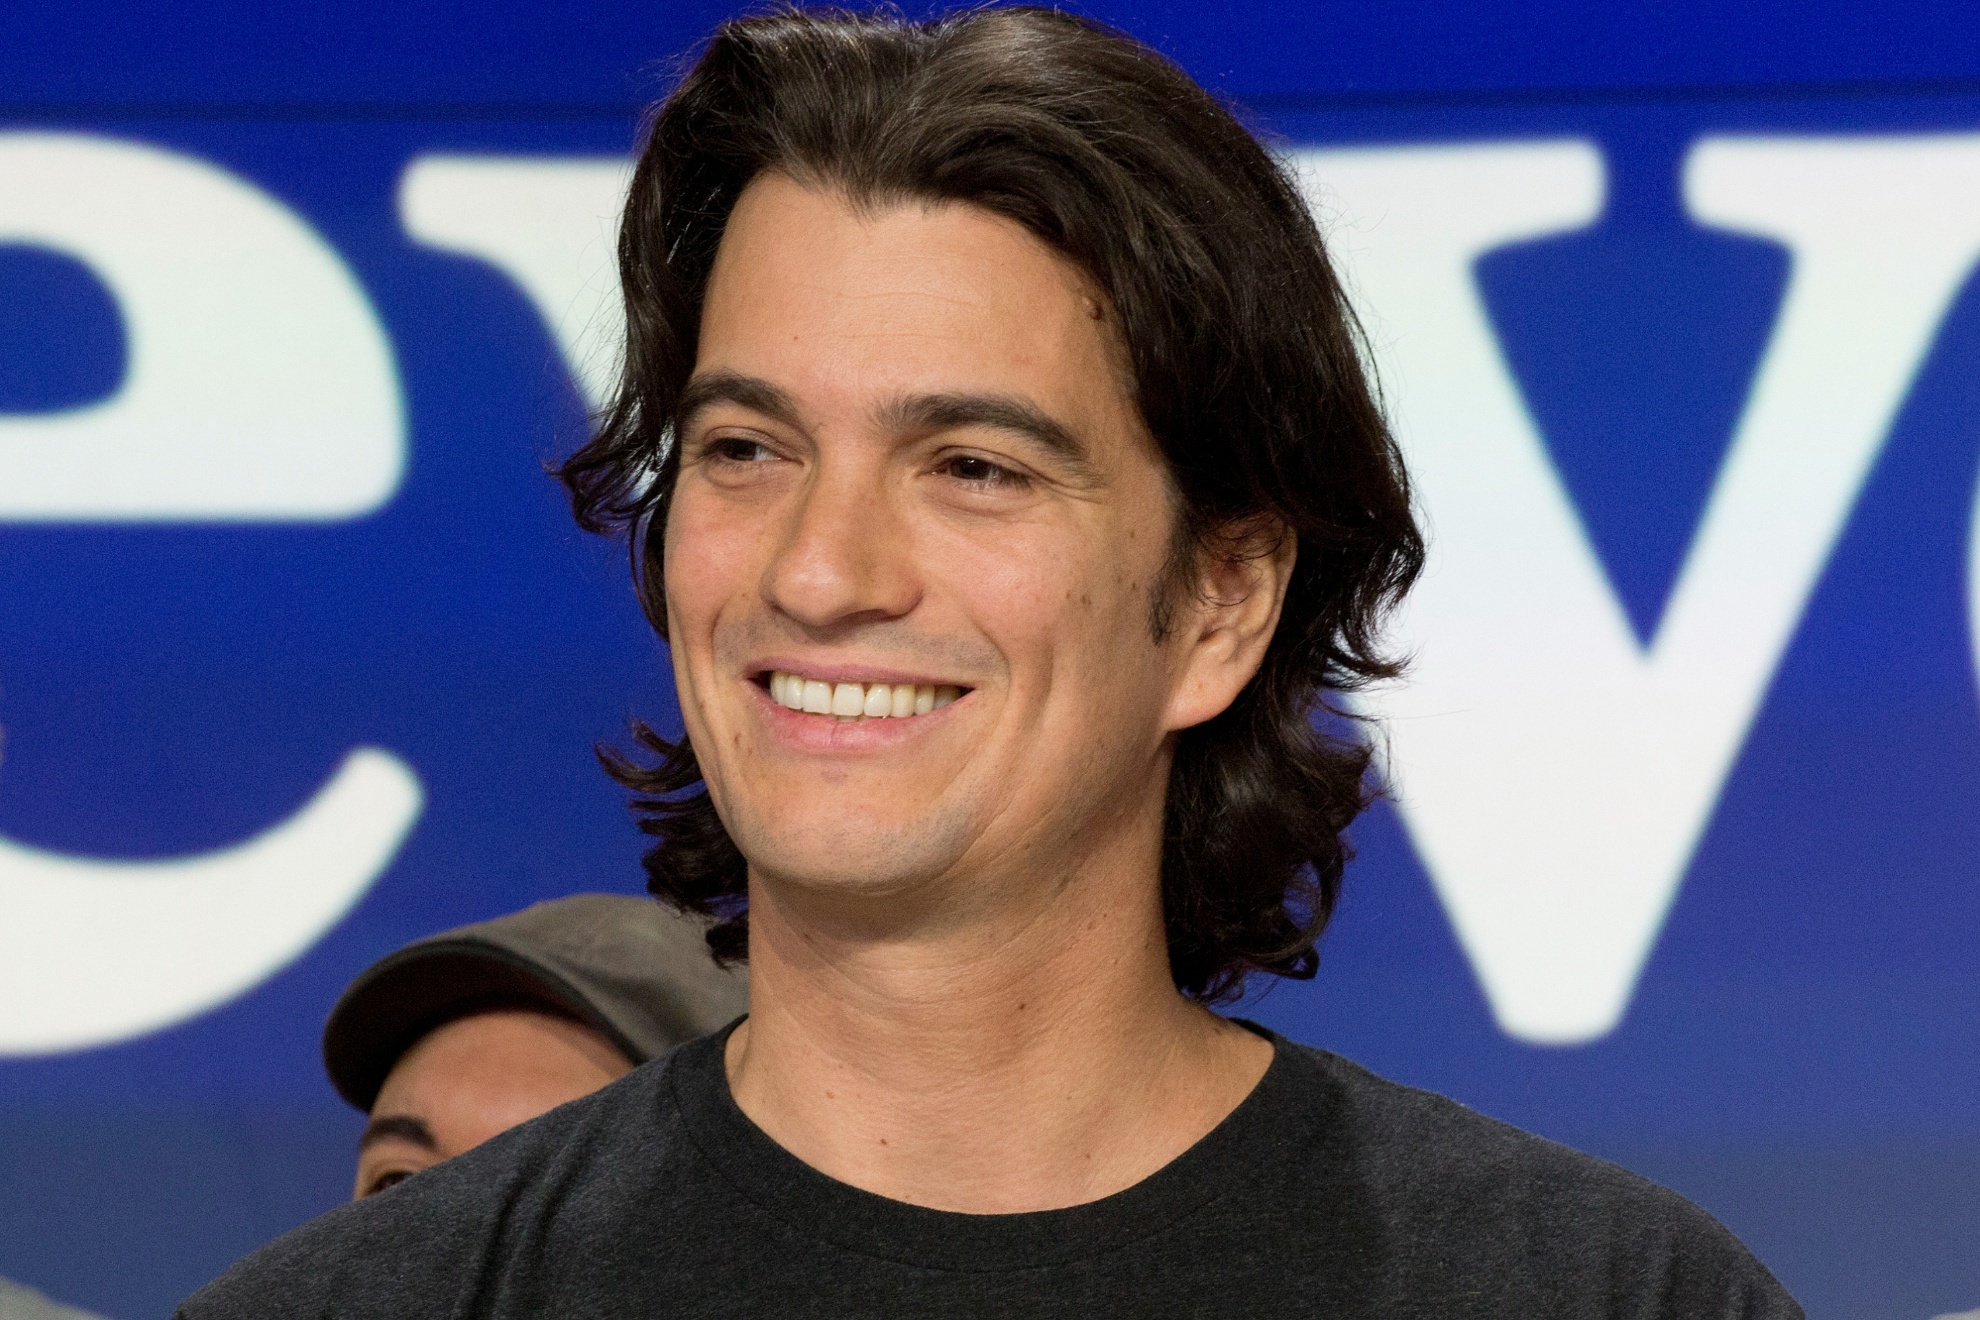 Adam Neumann, co-founder and former CEO of WeWork.